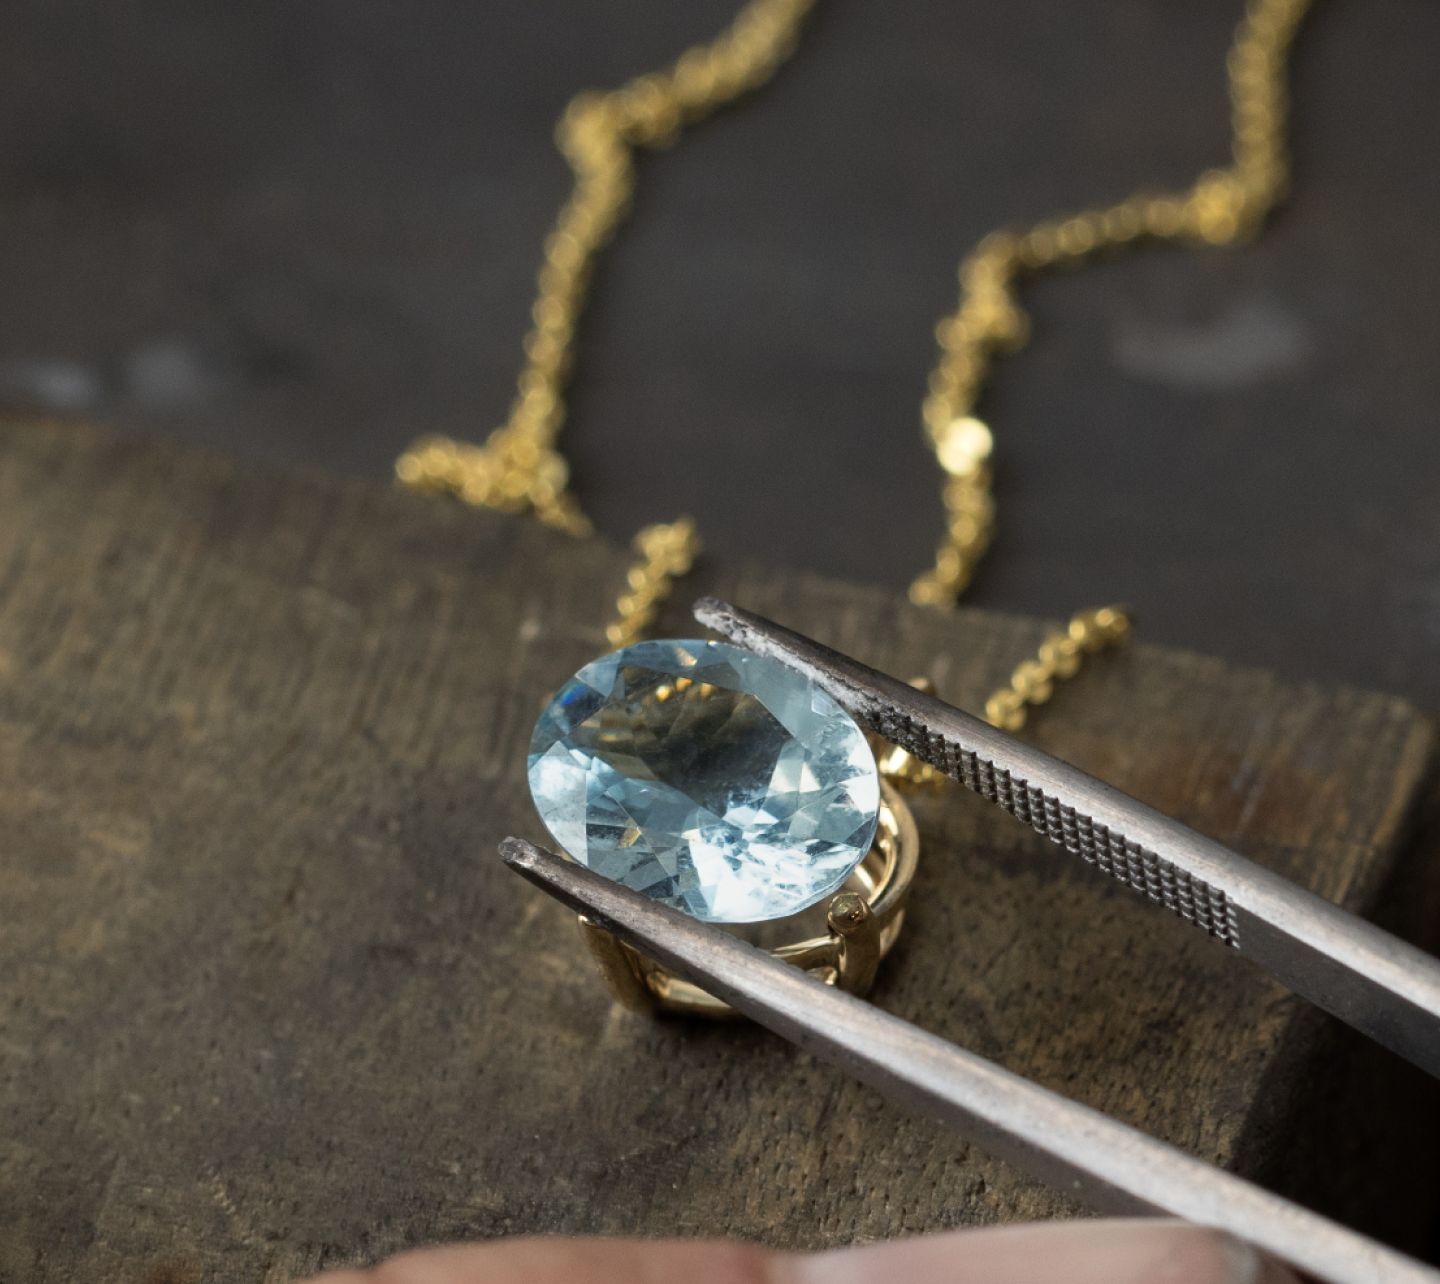 A loose gemstone being set into a fashion pendant